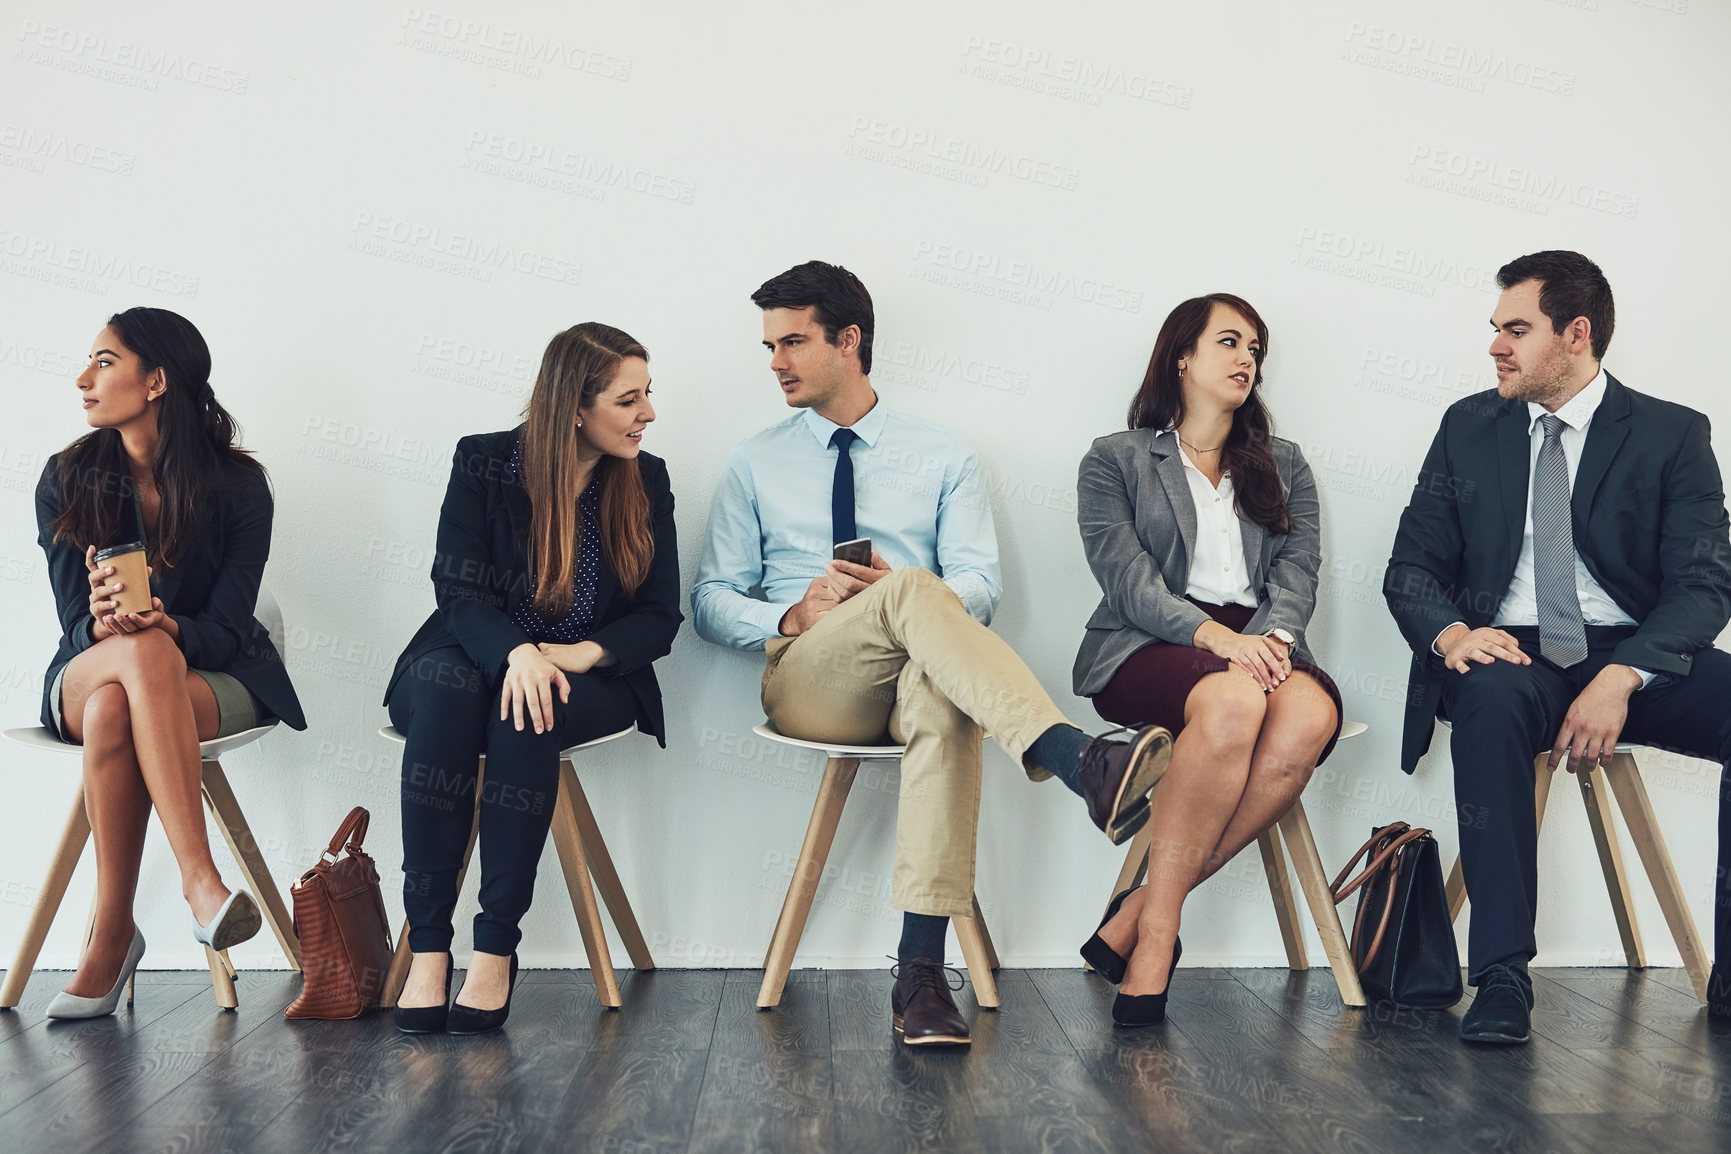 Buy stock photo Studio shot of a group of businesspeople talking while waiting in line